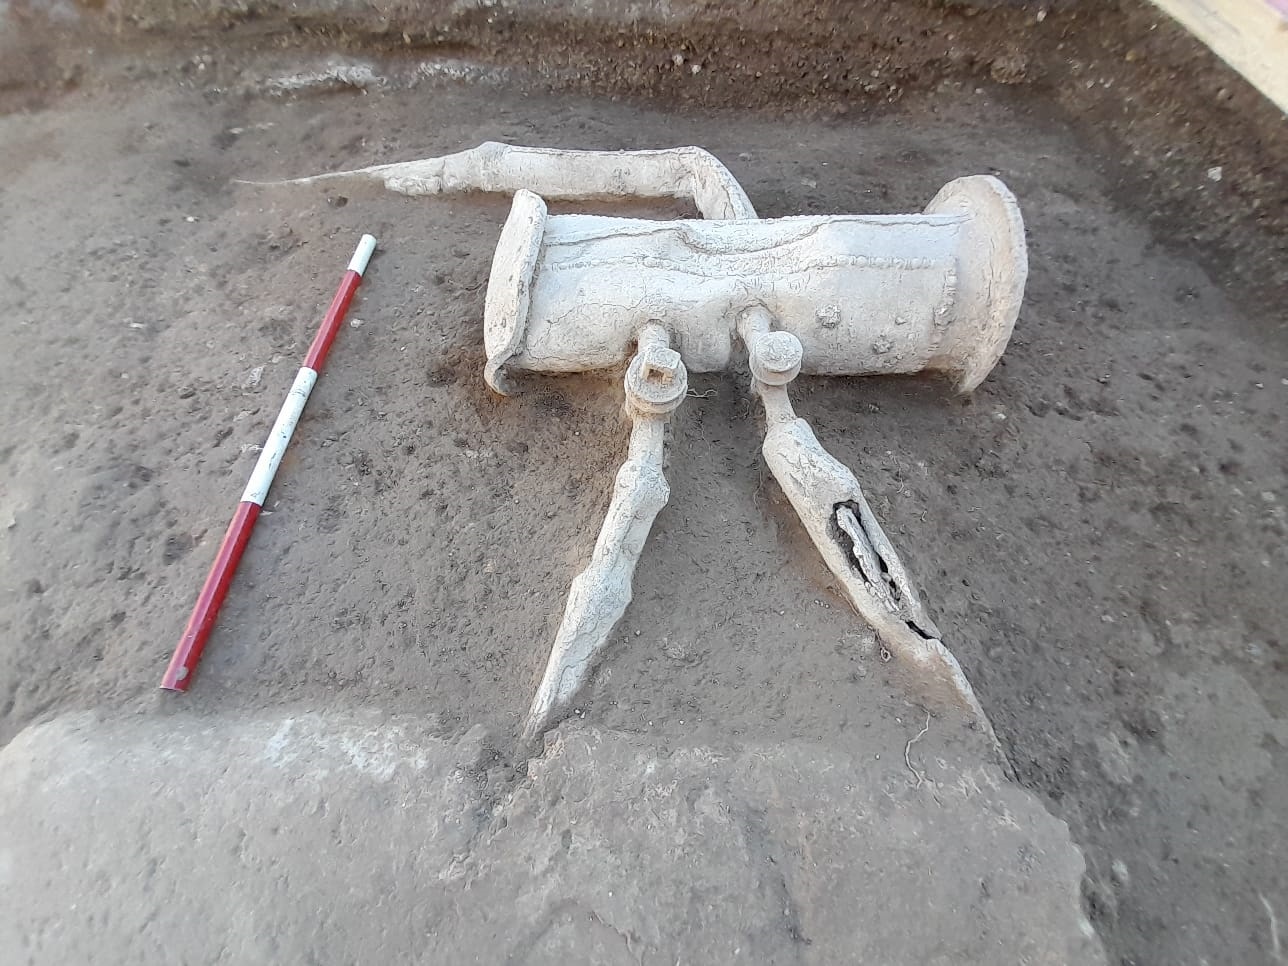 Roman water tank with pipes, valves revealed – The History Blog